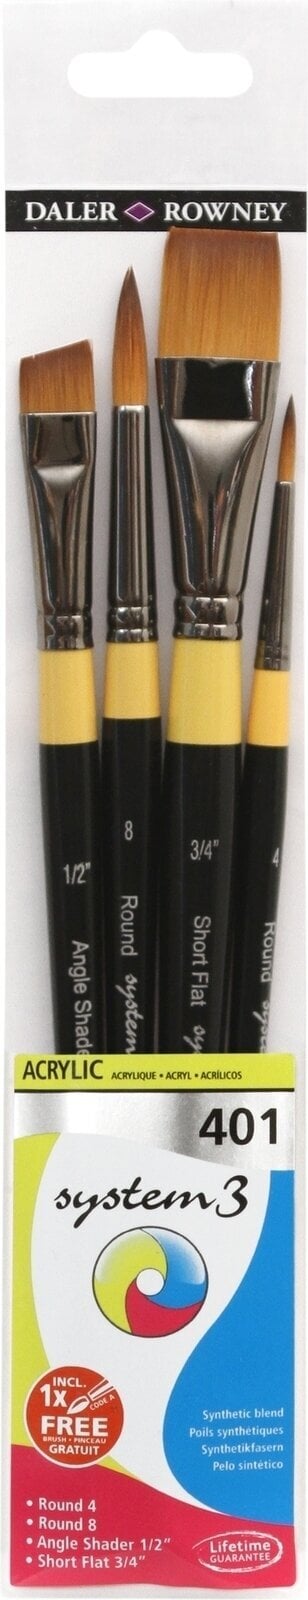 Pinsel Daler Rowney System3 Acrylic Brush Synthetic Pinselset 1 Stck